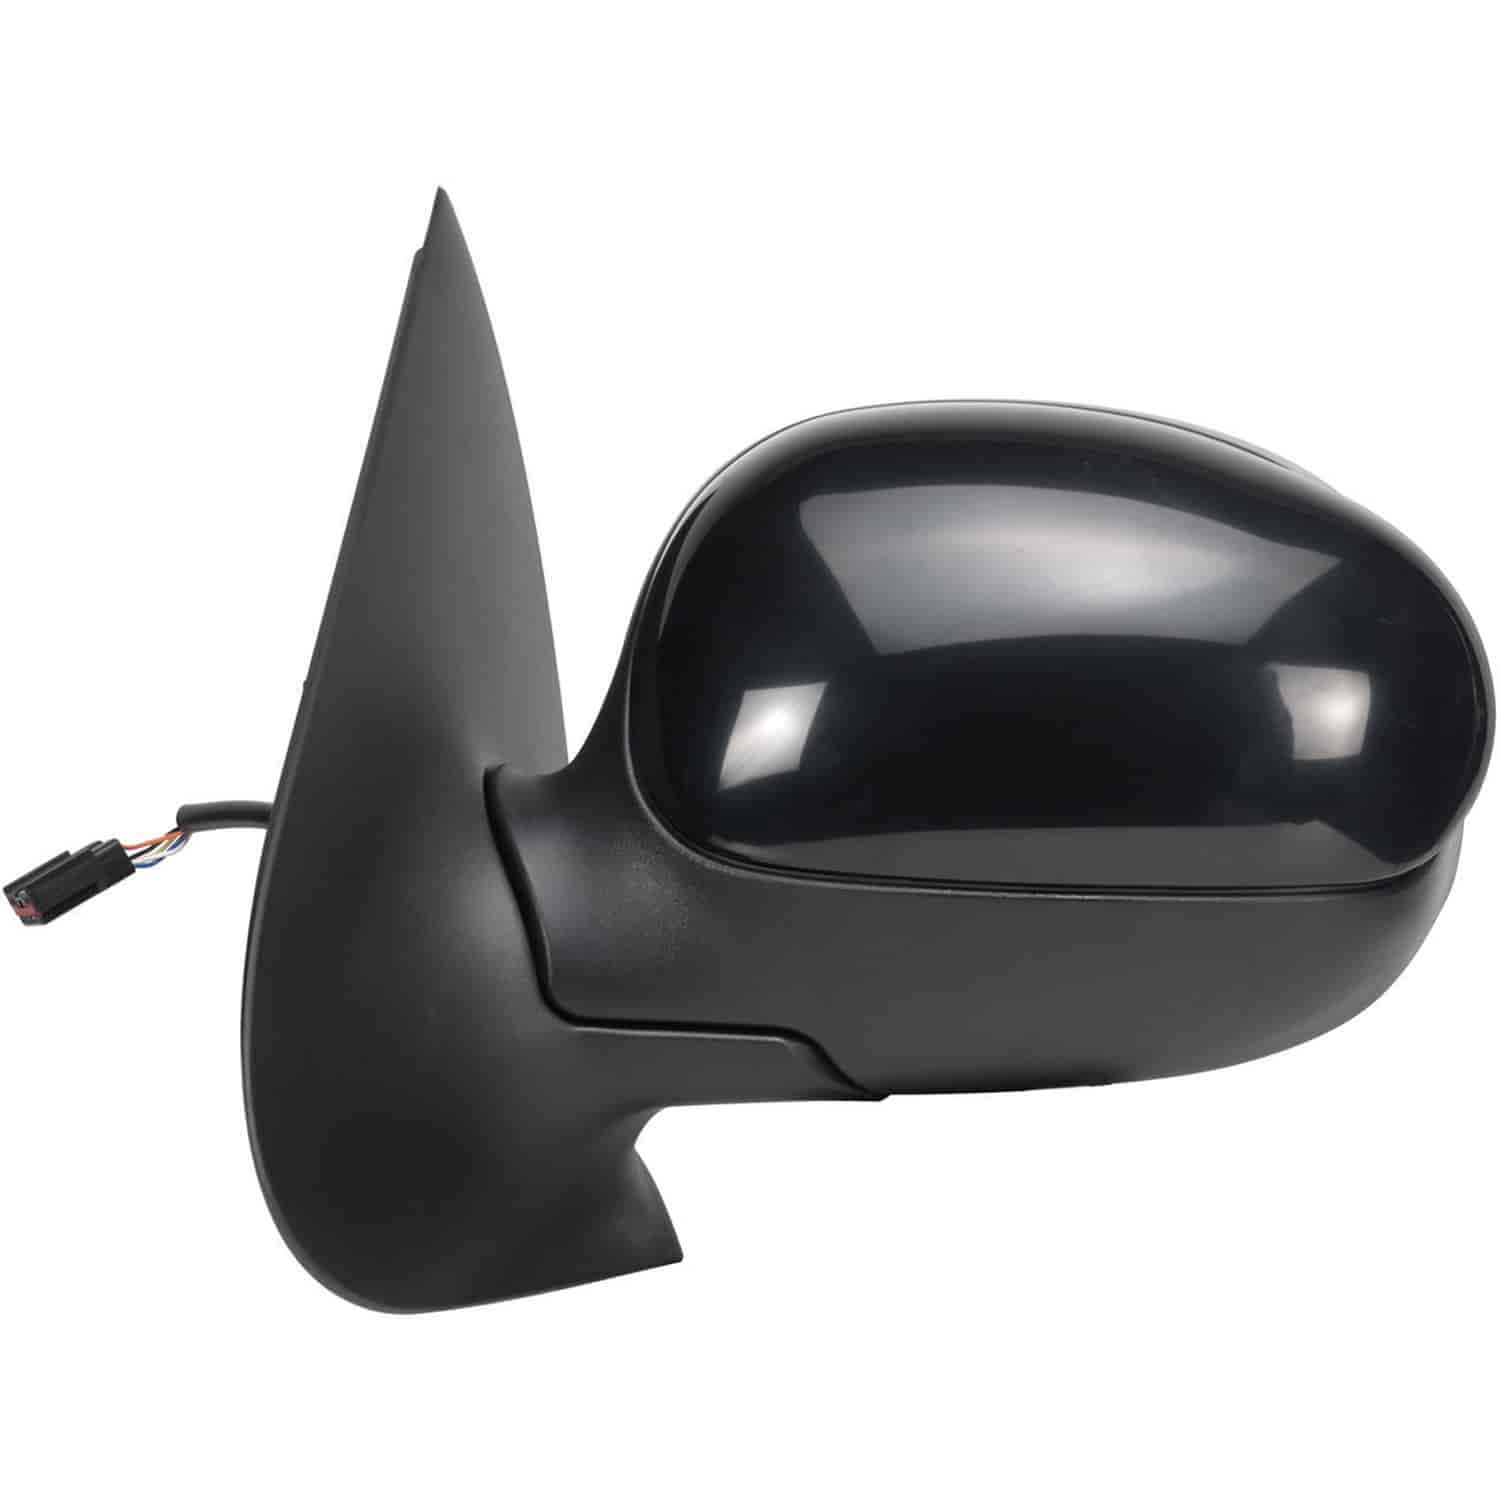 OEM Style Replacement mirror for 01-02 Expedition 00-02 Navigator driver side mirror tested to fit a